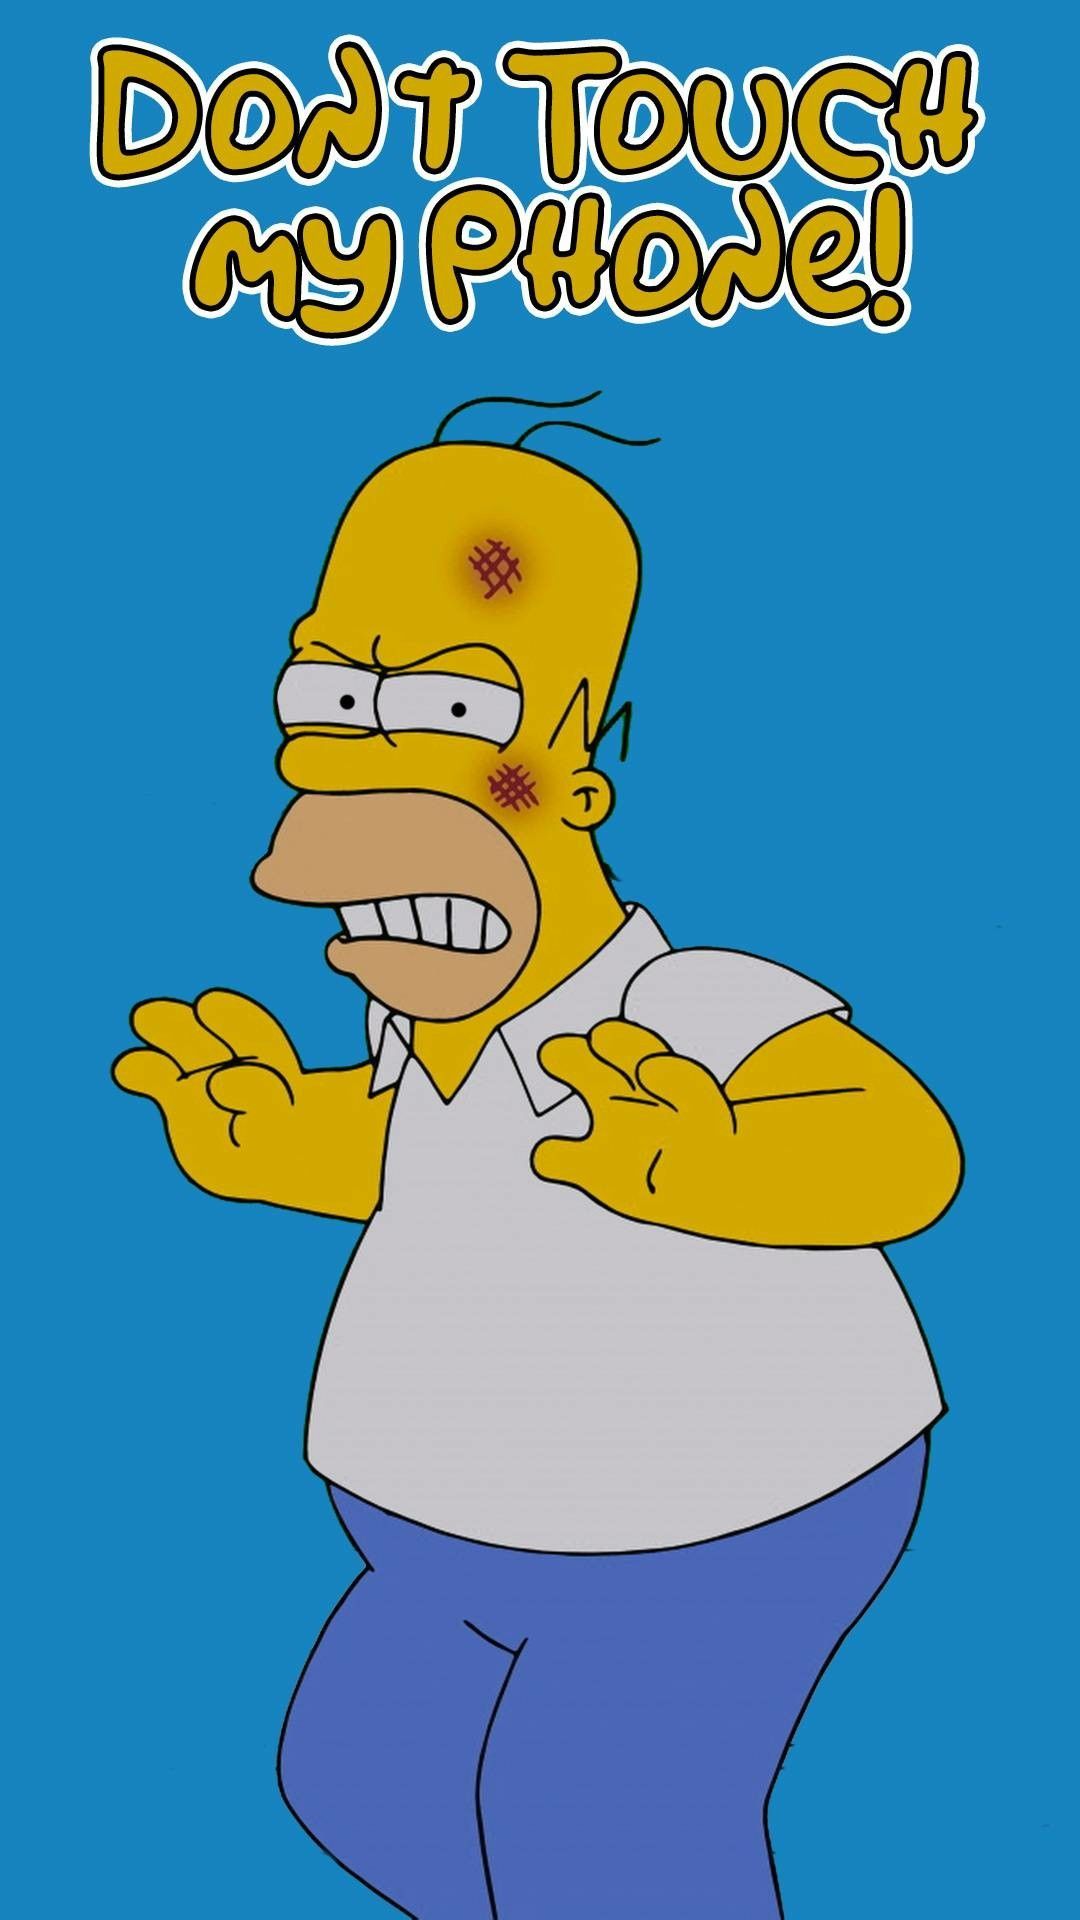 Homer Simpson don't touch my phone. Don't touch my phone wallpaper, Phone lock screen wallpaper - Homer Simpson, The Simpsons, don't touch my phone